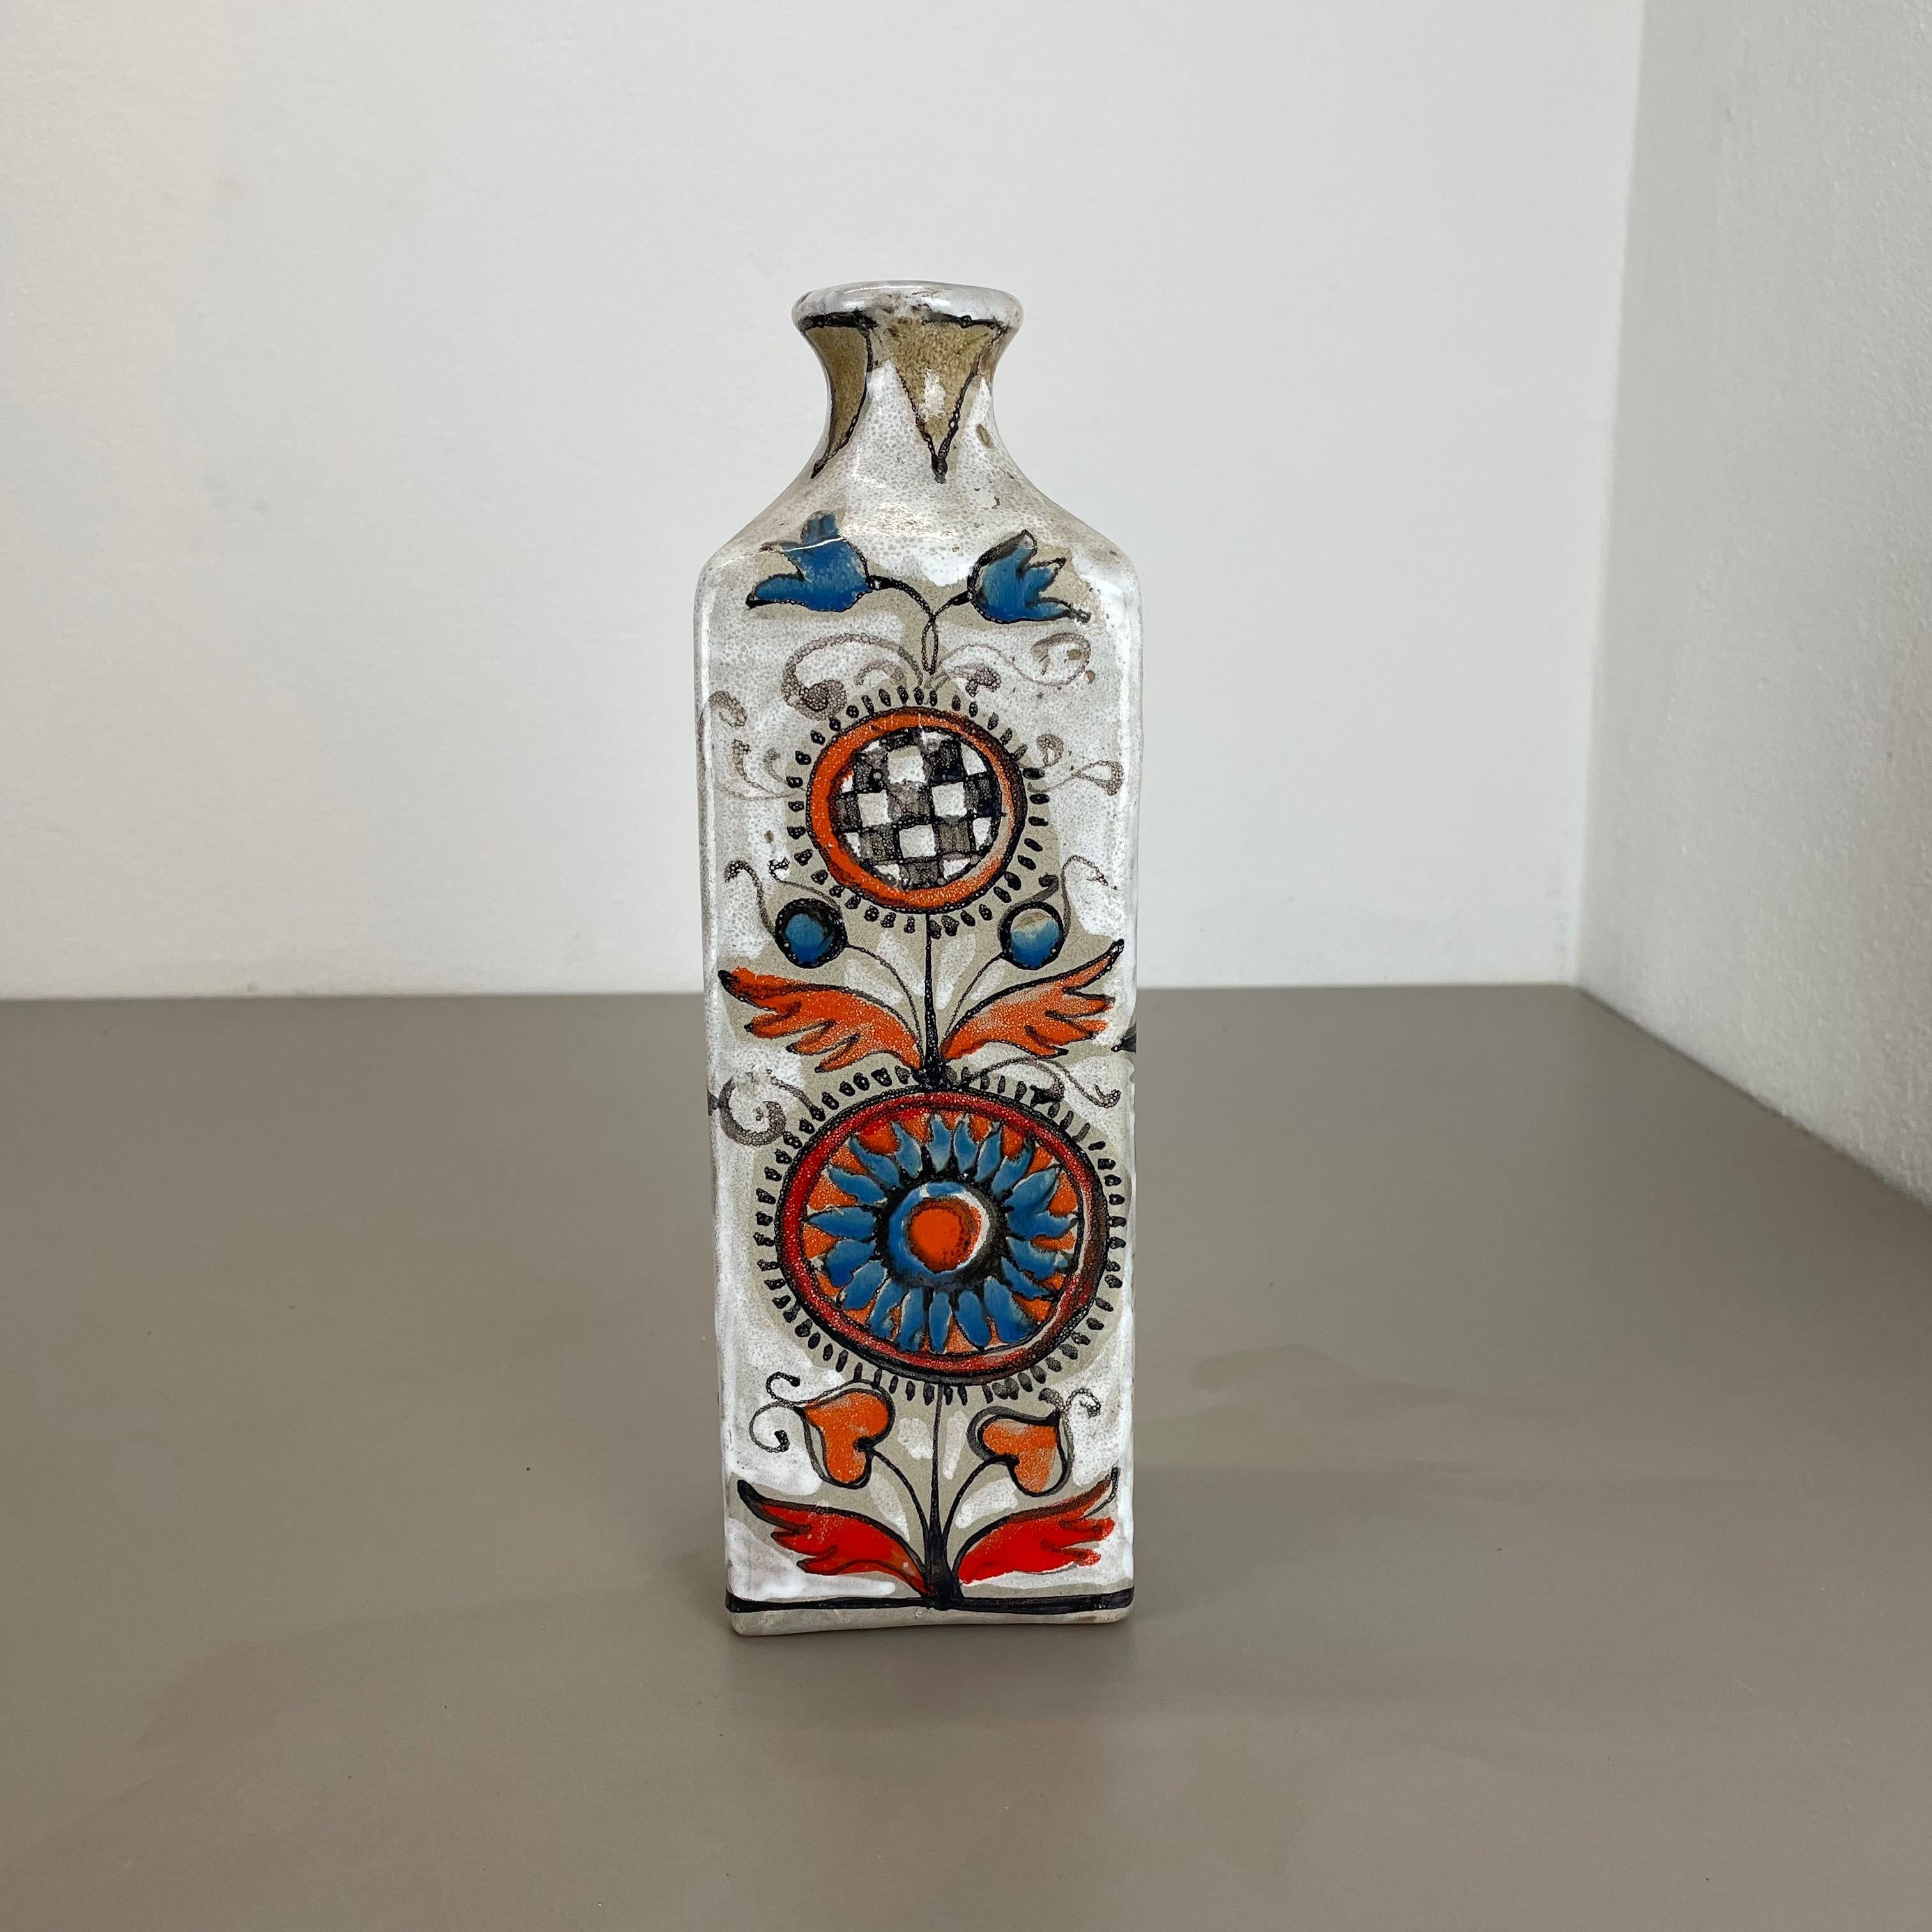 Article:

Ceramic vase


Producer:

Elio Schiavon, Italy


Decade:

1970s



This original vintage Studio Pottery vase was produced in the 1970s by Elio Schiavon Ceramics, Italy. Rare object in a nice sculptural form with one opening on the top. the